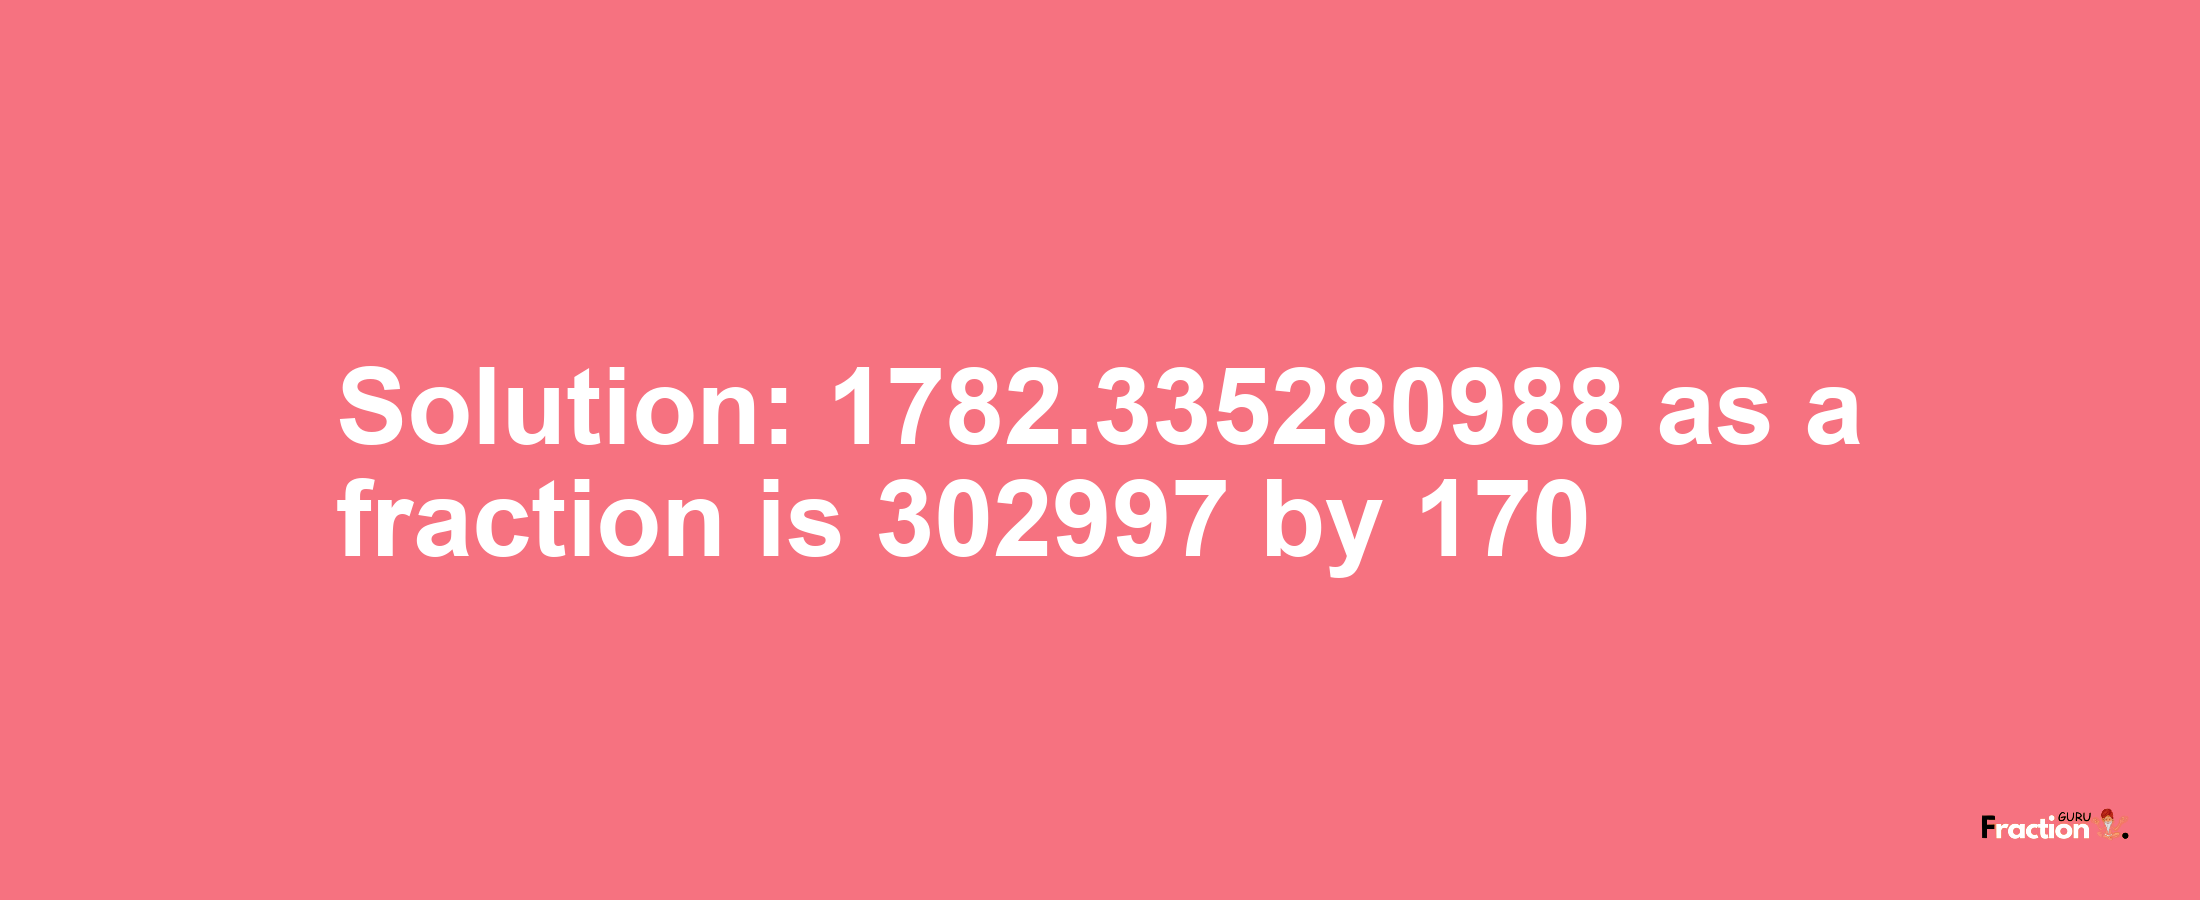 Solution:1782.335280988 as a fraction is 302997/170